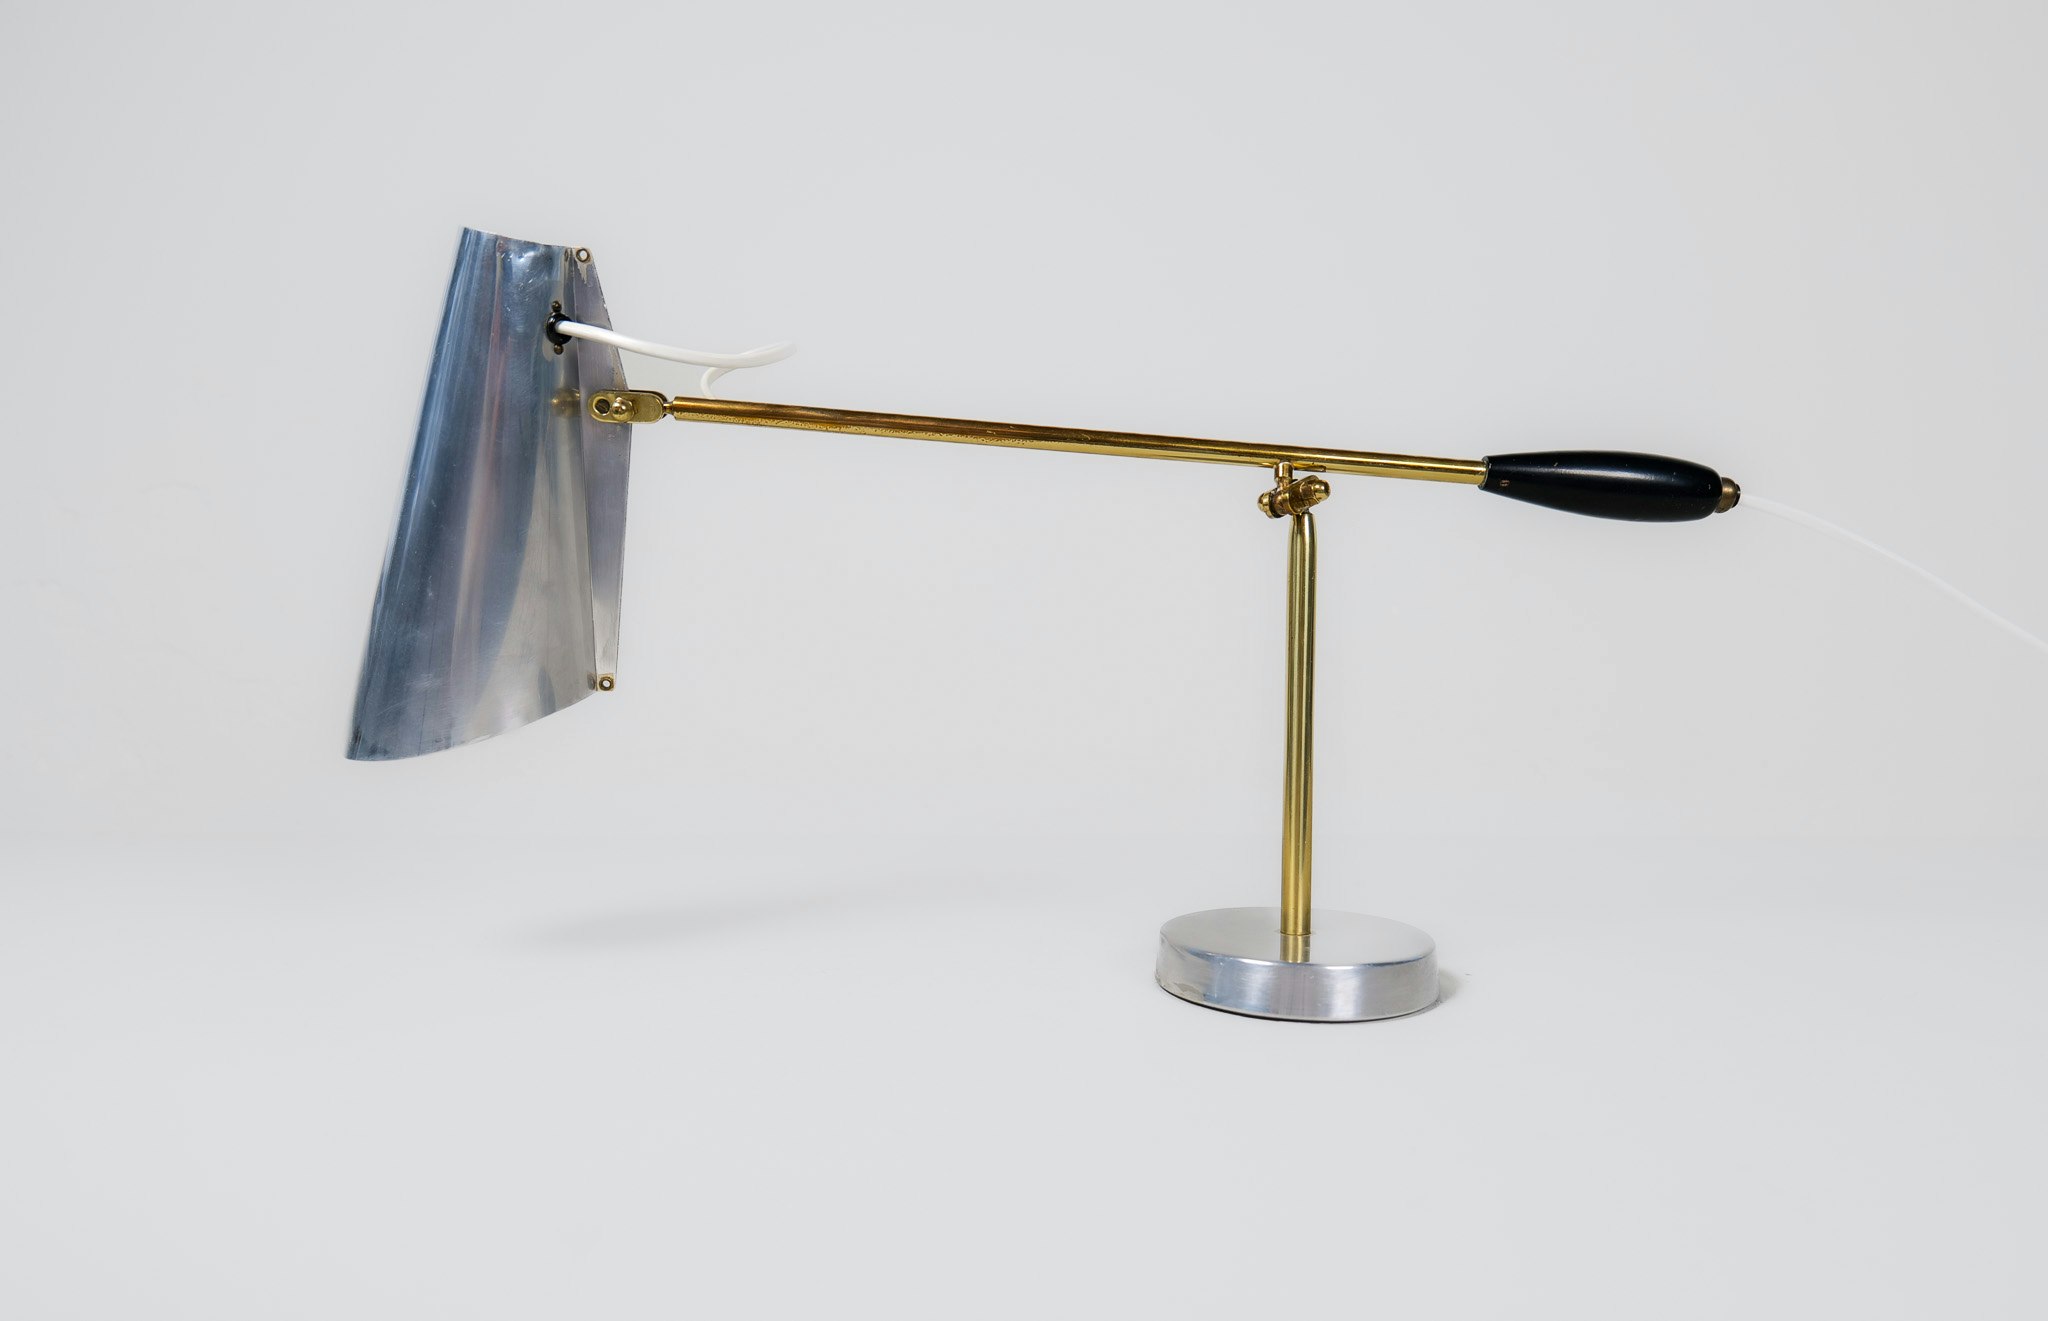 Midcentury Modern 1950s Birger Dahl Table Lamp "Birdy" for Sonnico Norway